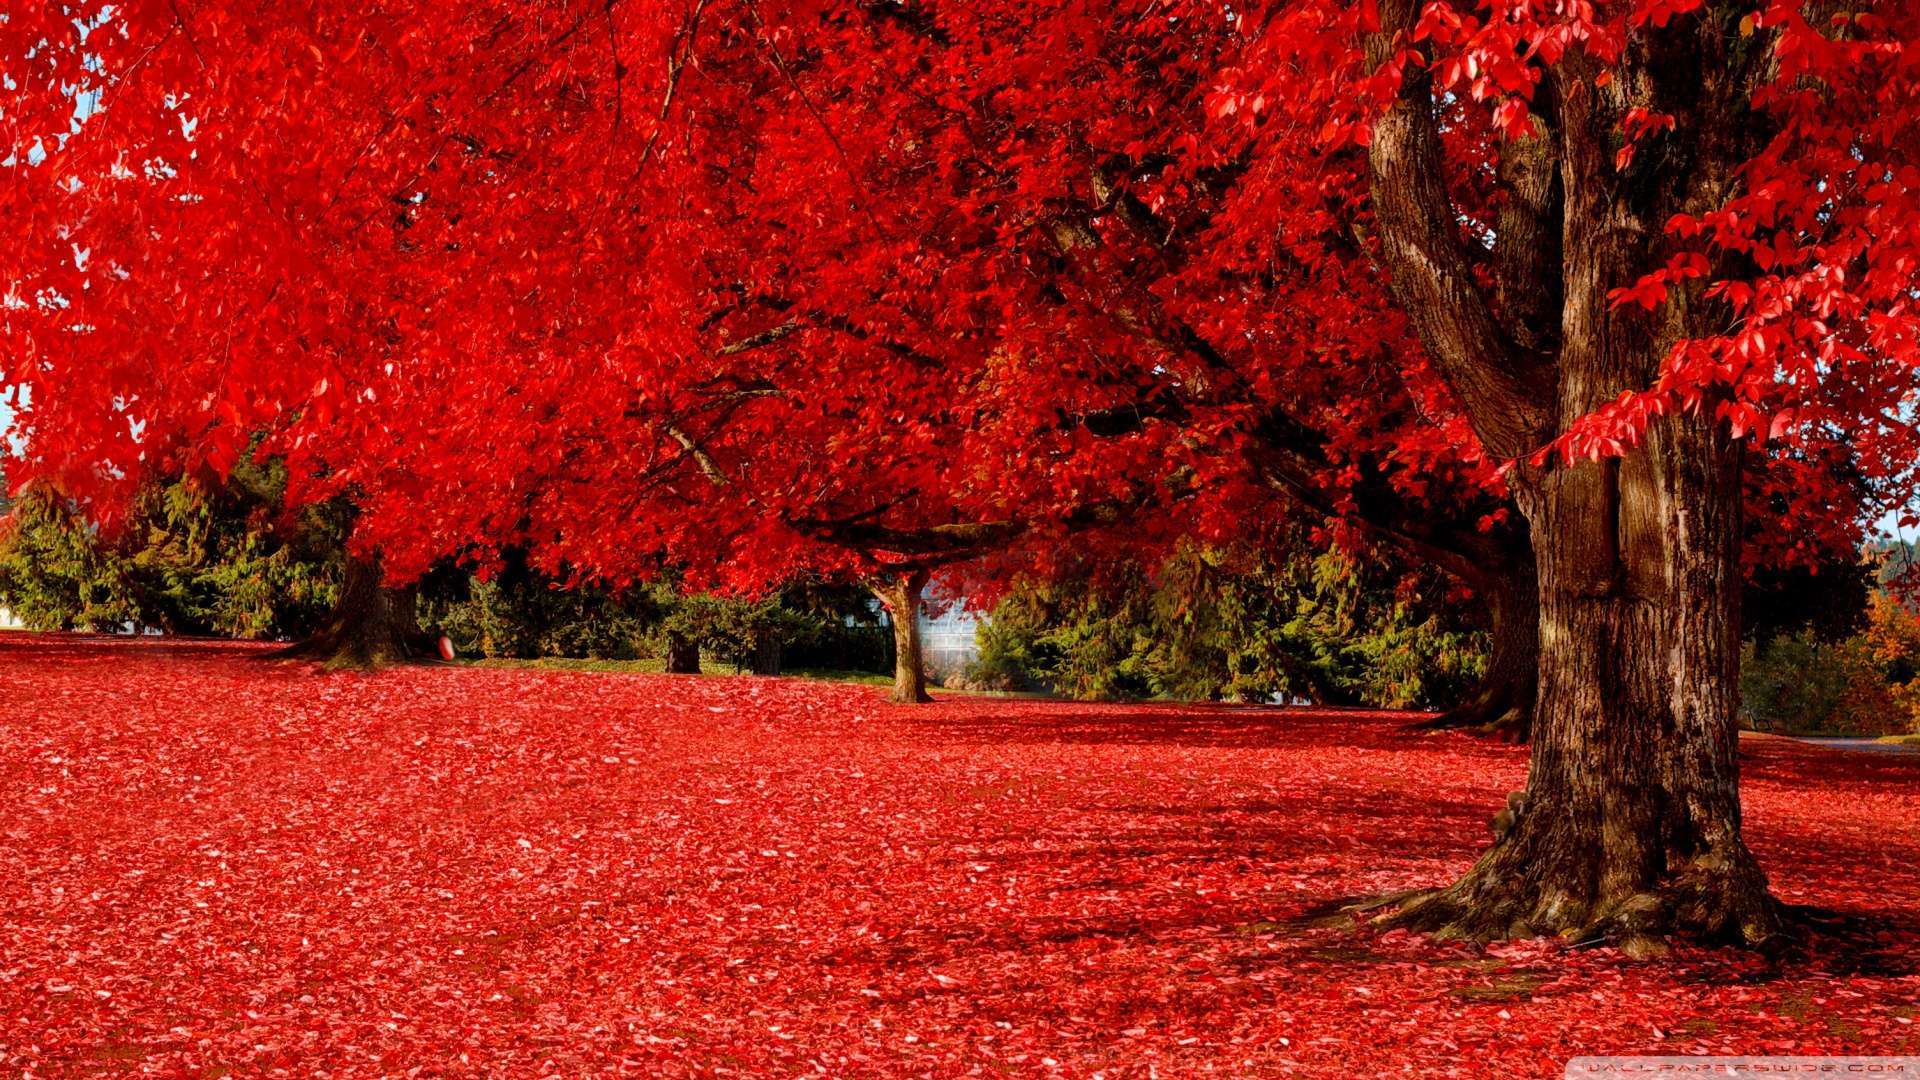 Wallpaper Red Autumn 1080p HD Upload At February